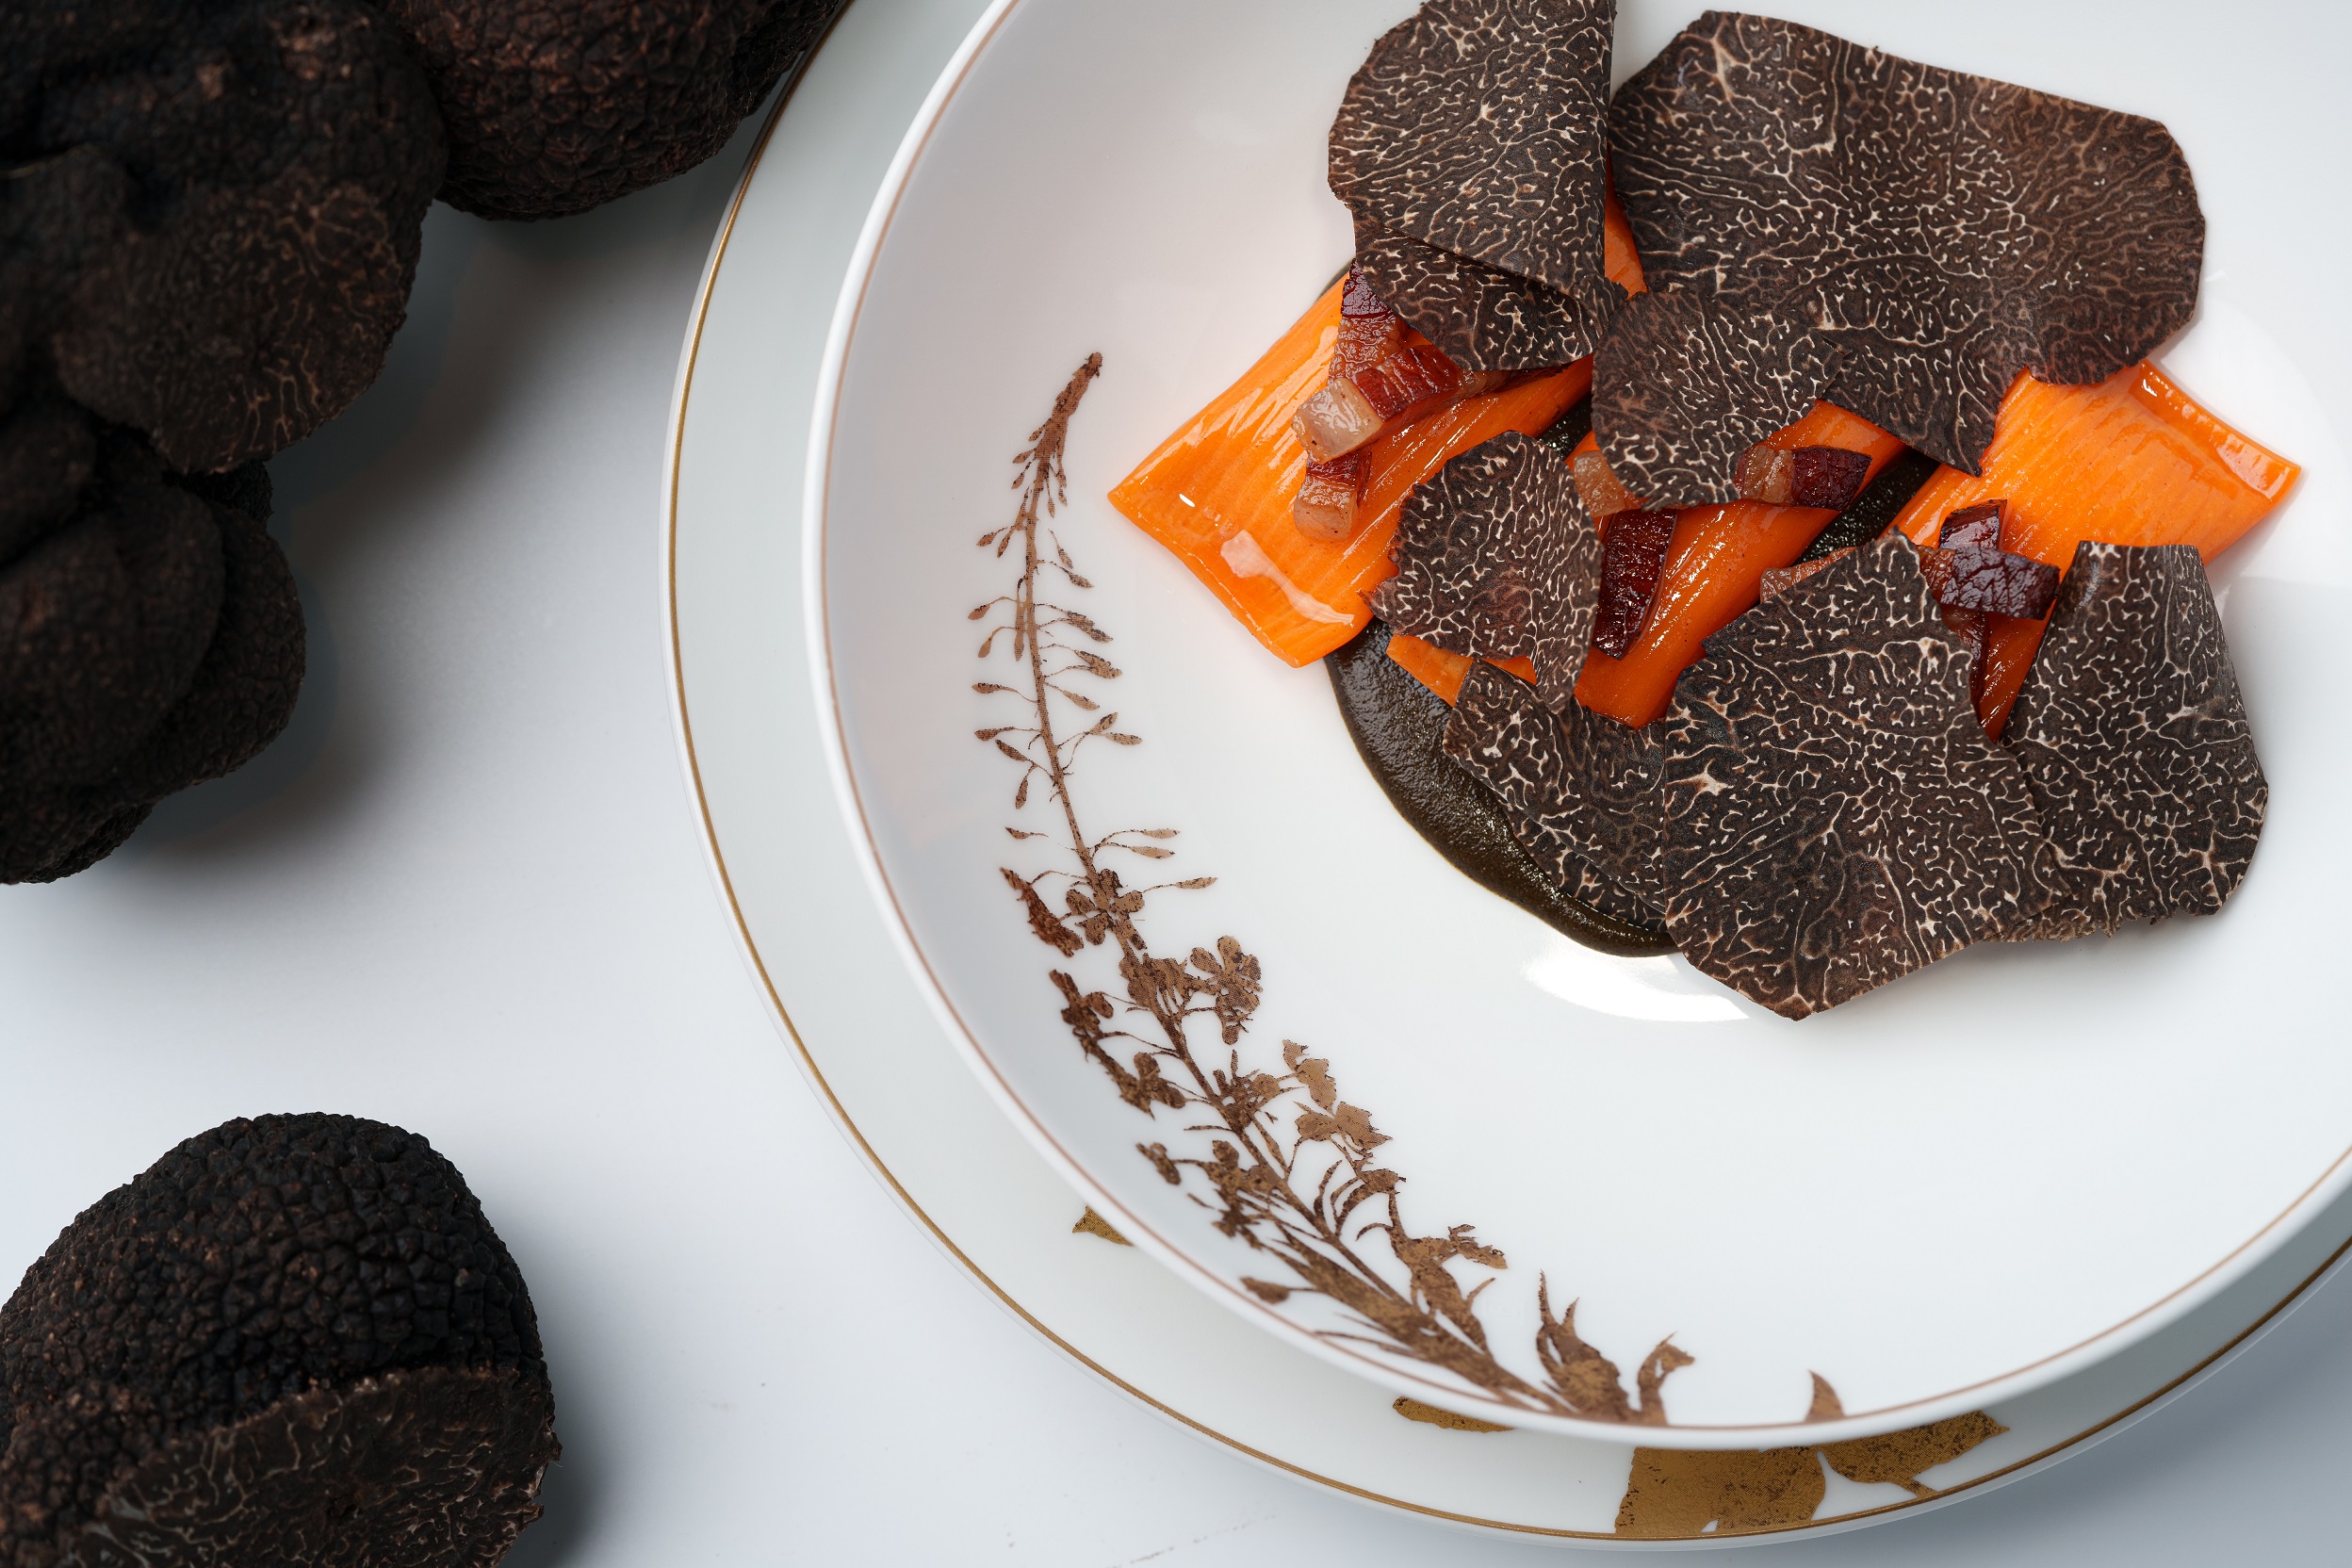 Exclusive Black Truffle Dinner with Wine Pairing is on June 28 and 29_R.jpg